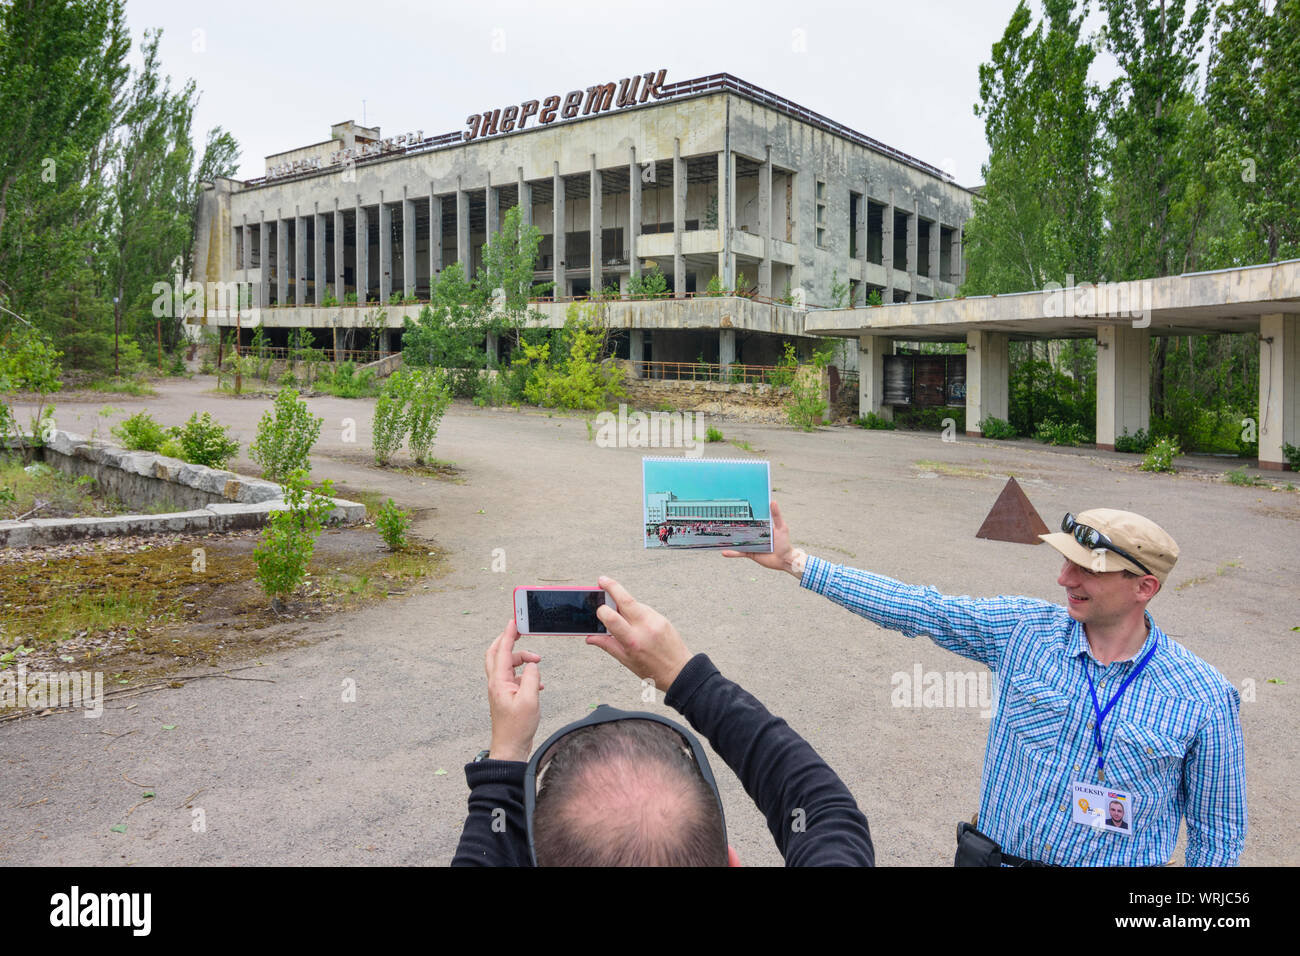 Pripyat (Prypiat): abandoned Palace of Culture Energetik, guide shows image of original look in Chernobyl (Chornobyl) Exclusion Zone, Kiev Oblast, Ukr Stock Photo